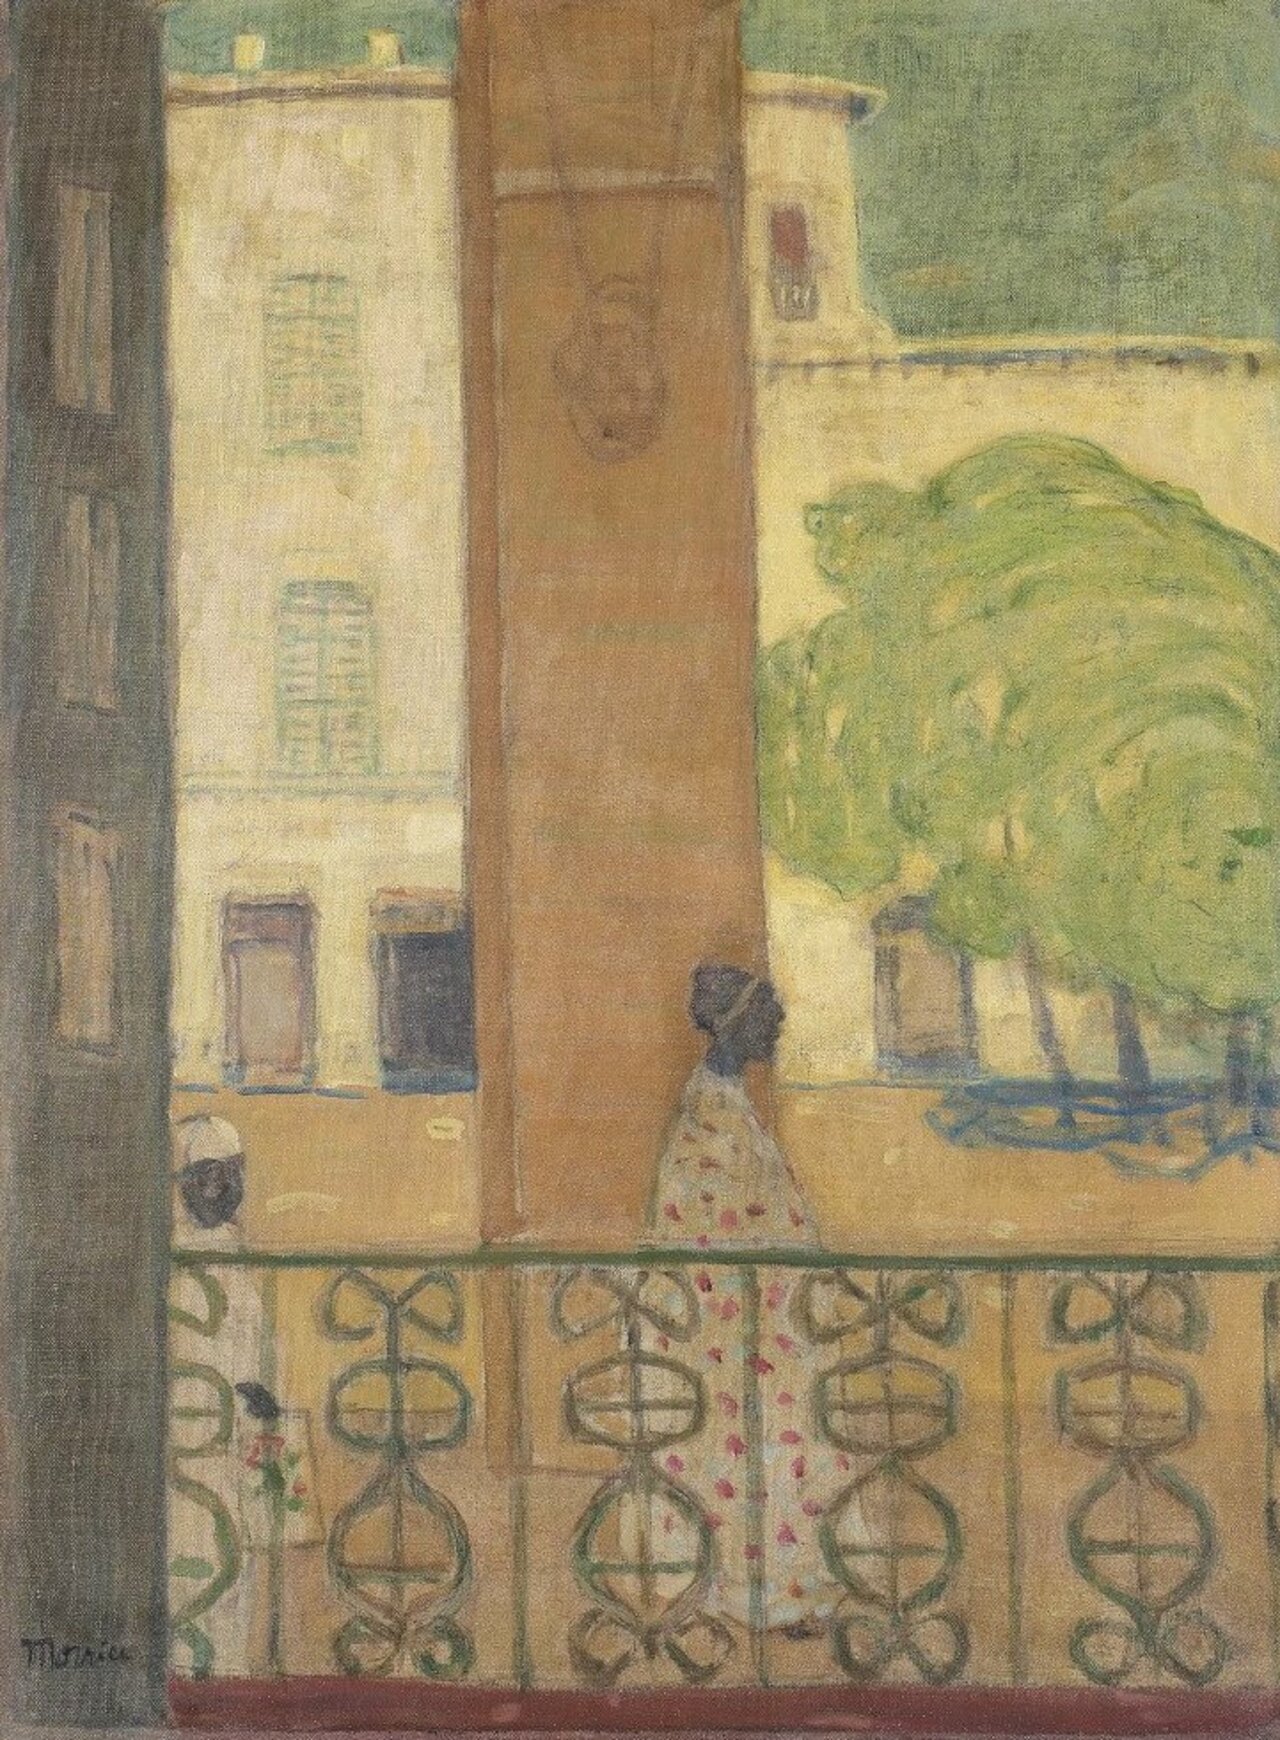 "Scene in Havana, #Cuba" (1915) by James William Morrice captures the warm, rich light that inspired many artists. https://t.co/lwPJBO8y2f